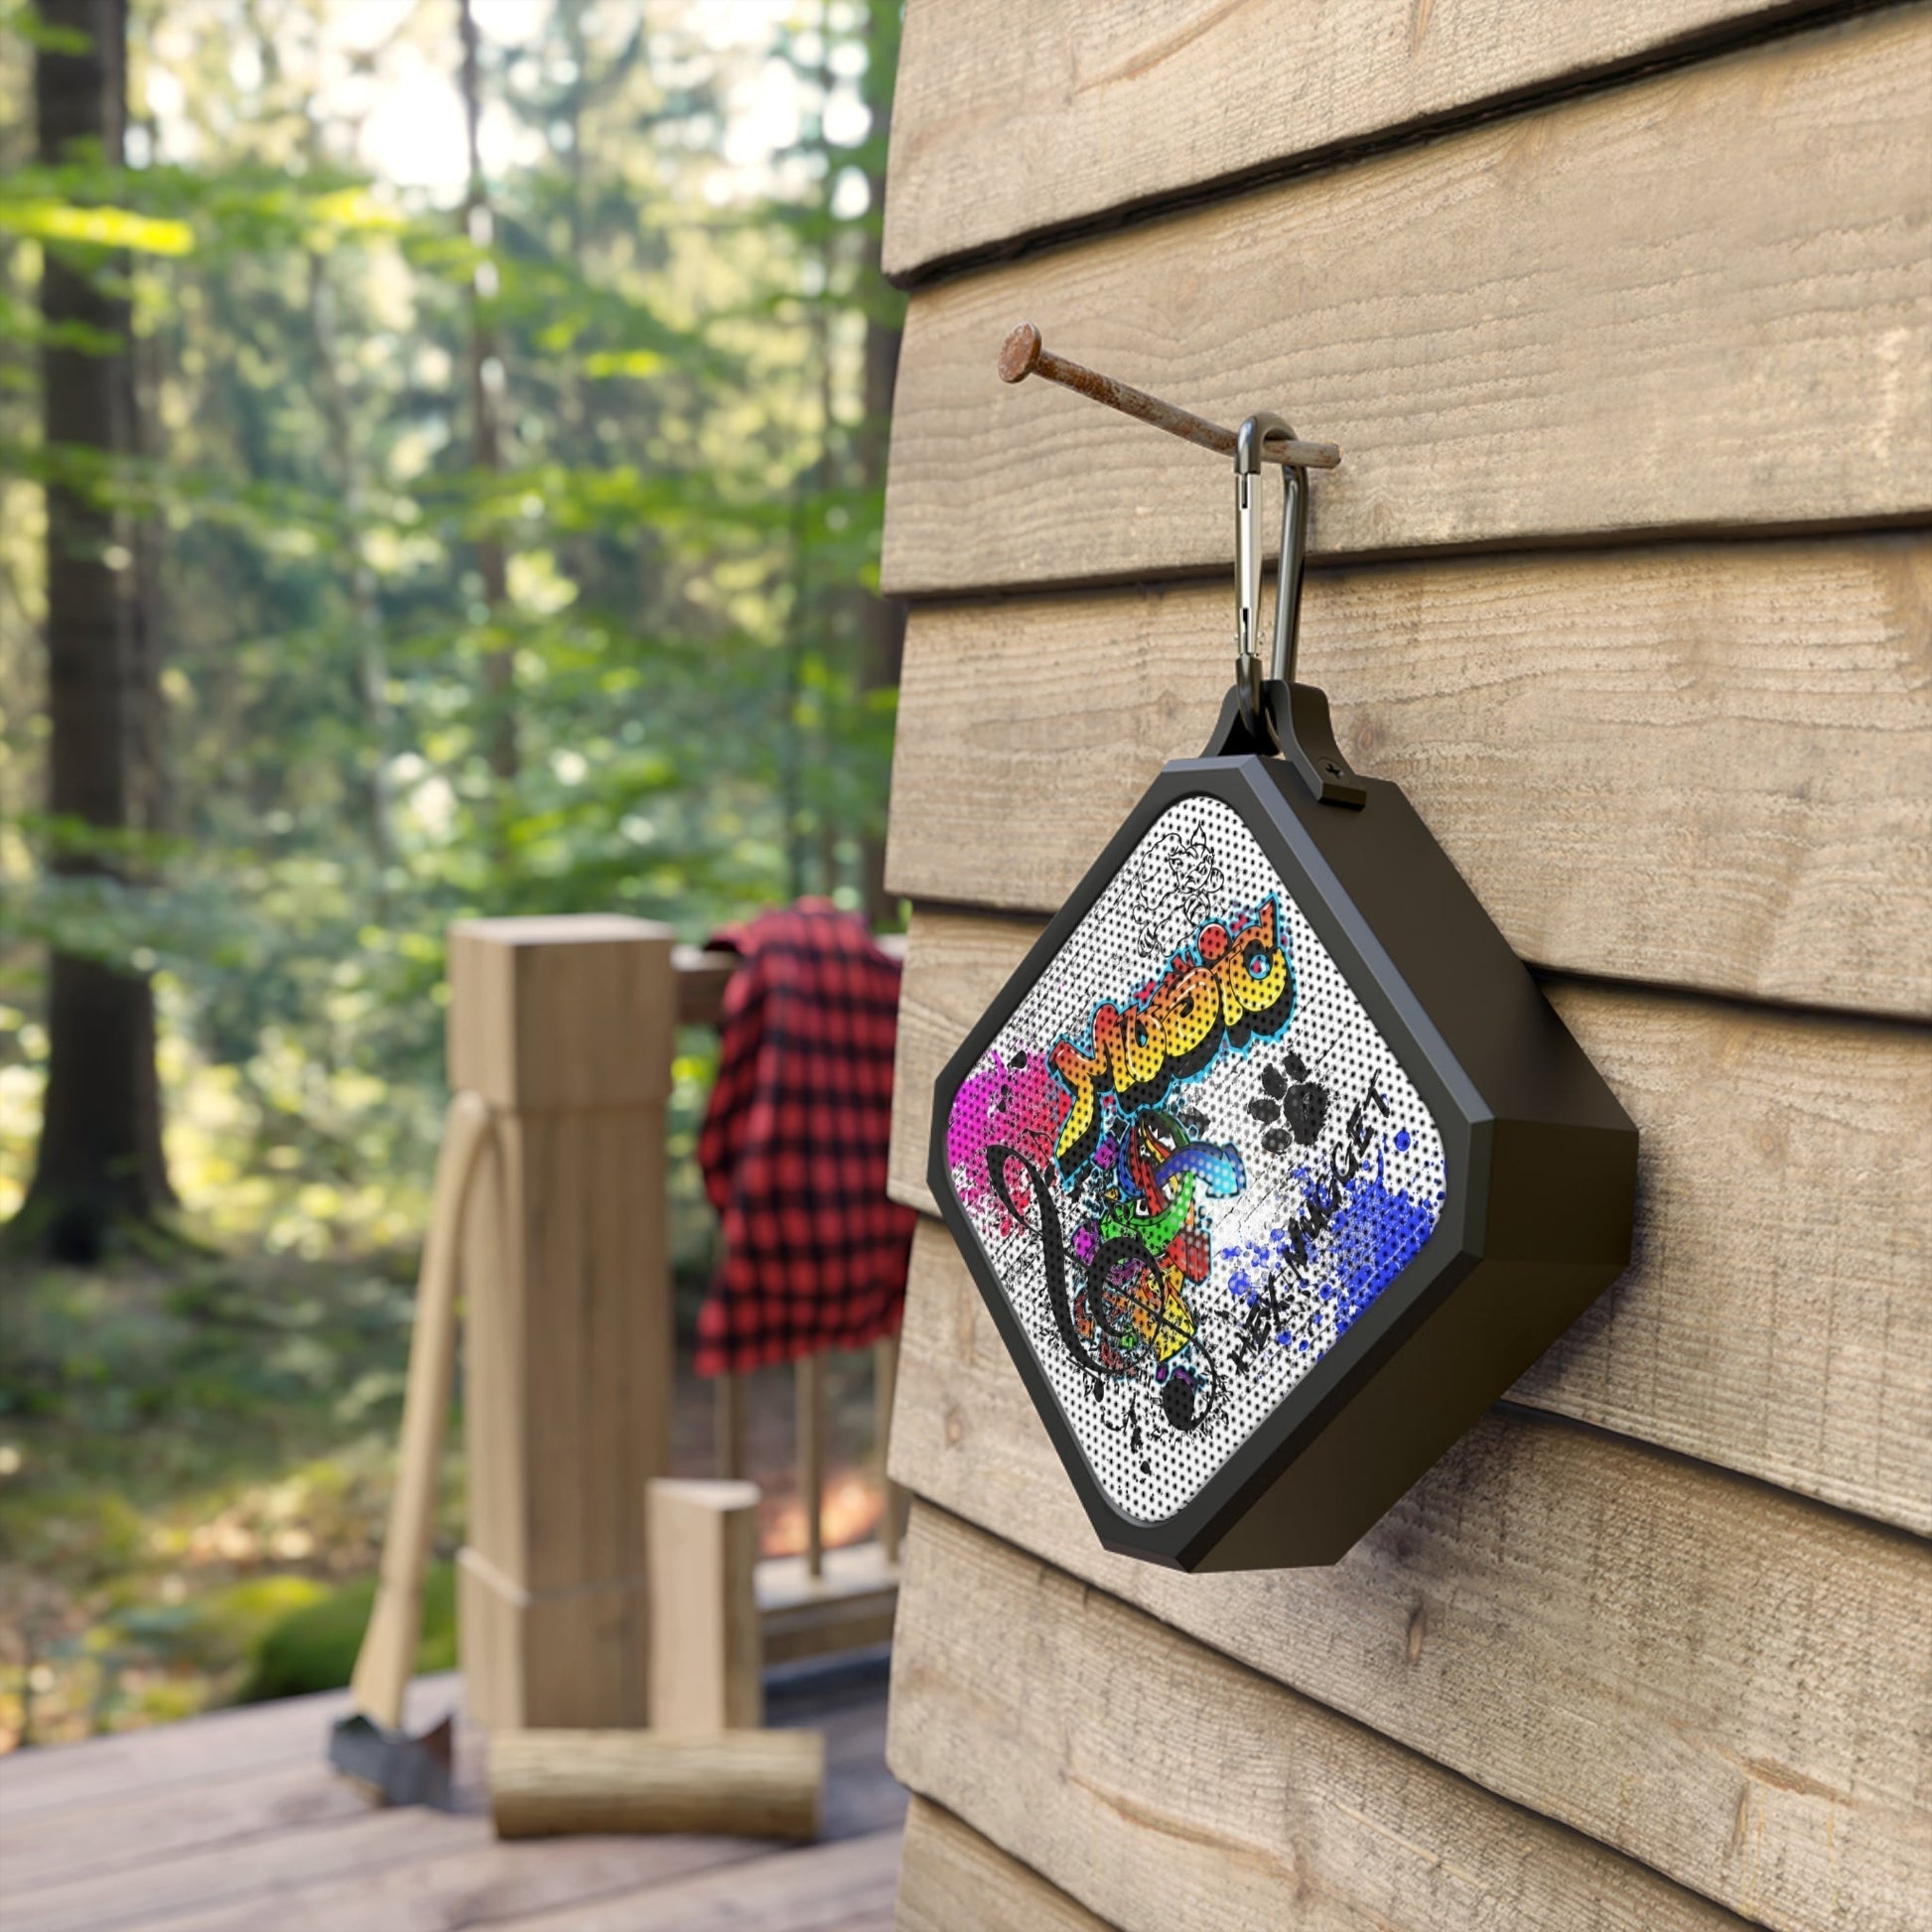 Stand out  with the  Street Style  Outdoor Bluetooth Speaker  available at Hey Nugget. Grab yours today!